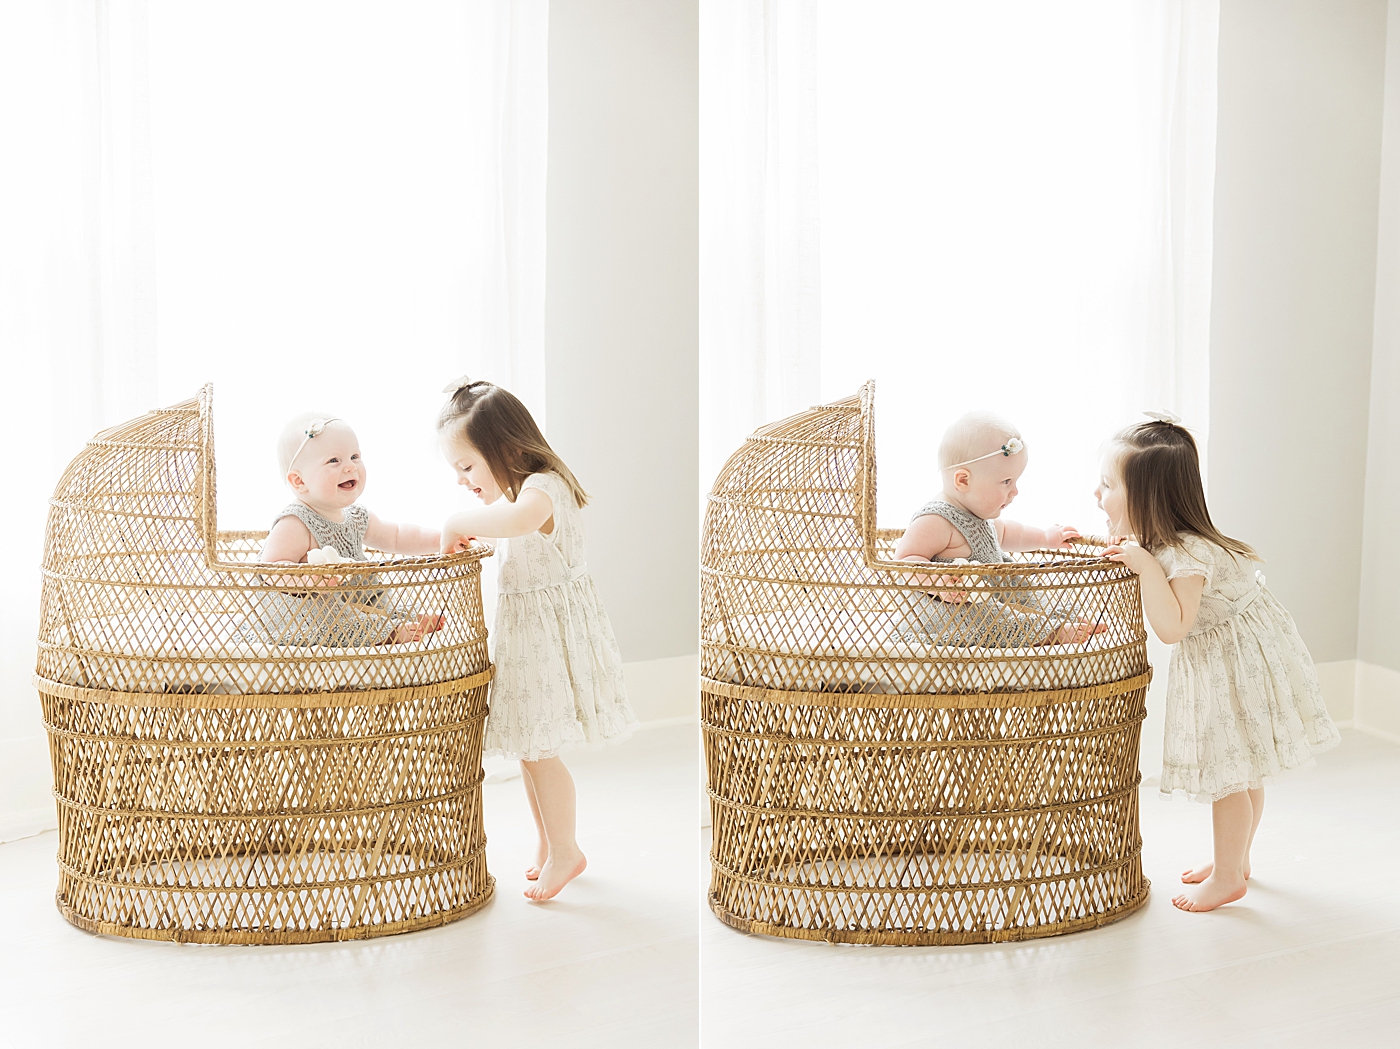 Six month in old Moses style basinet and big sister looking over her. Photos by Fresh Like Photography.